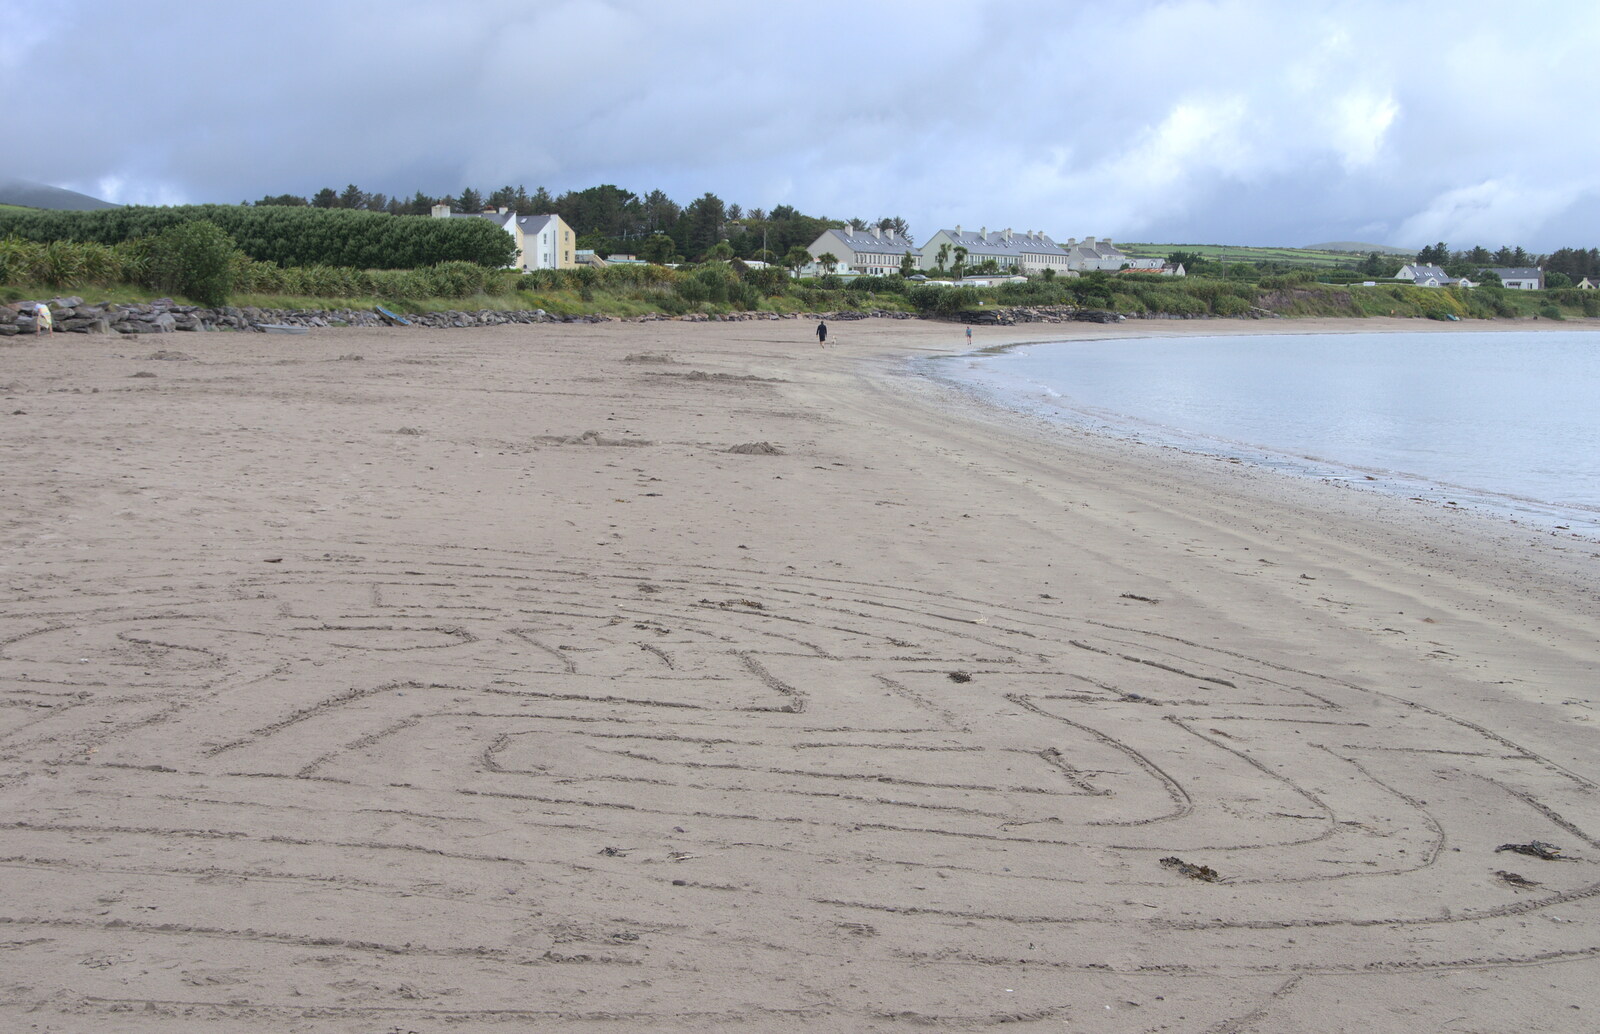 Someone's drawn a maze on the sand from Baile an Sceilg to An tSnaidhme, Co. Kerry, Ireland - 31st July 2017